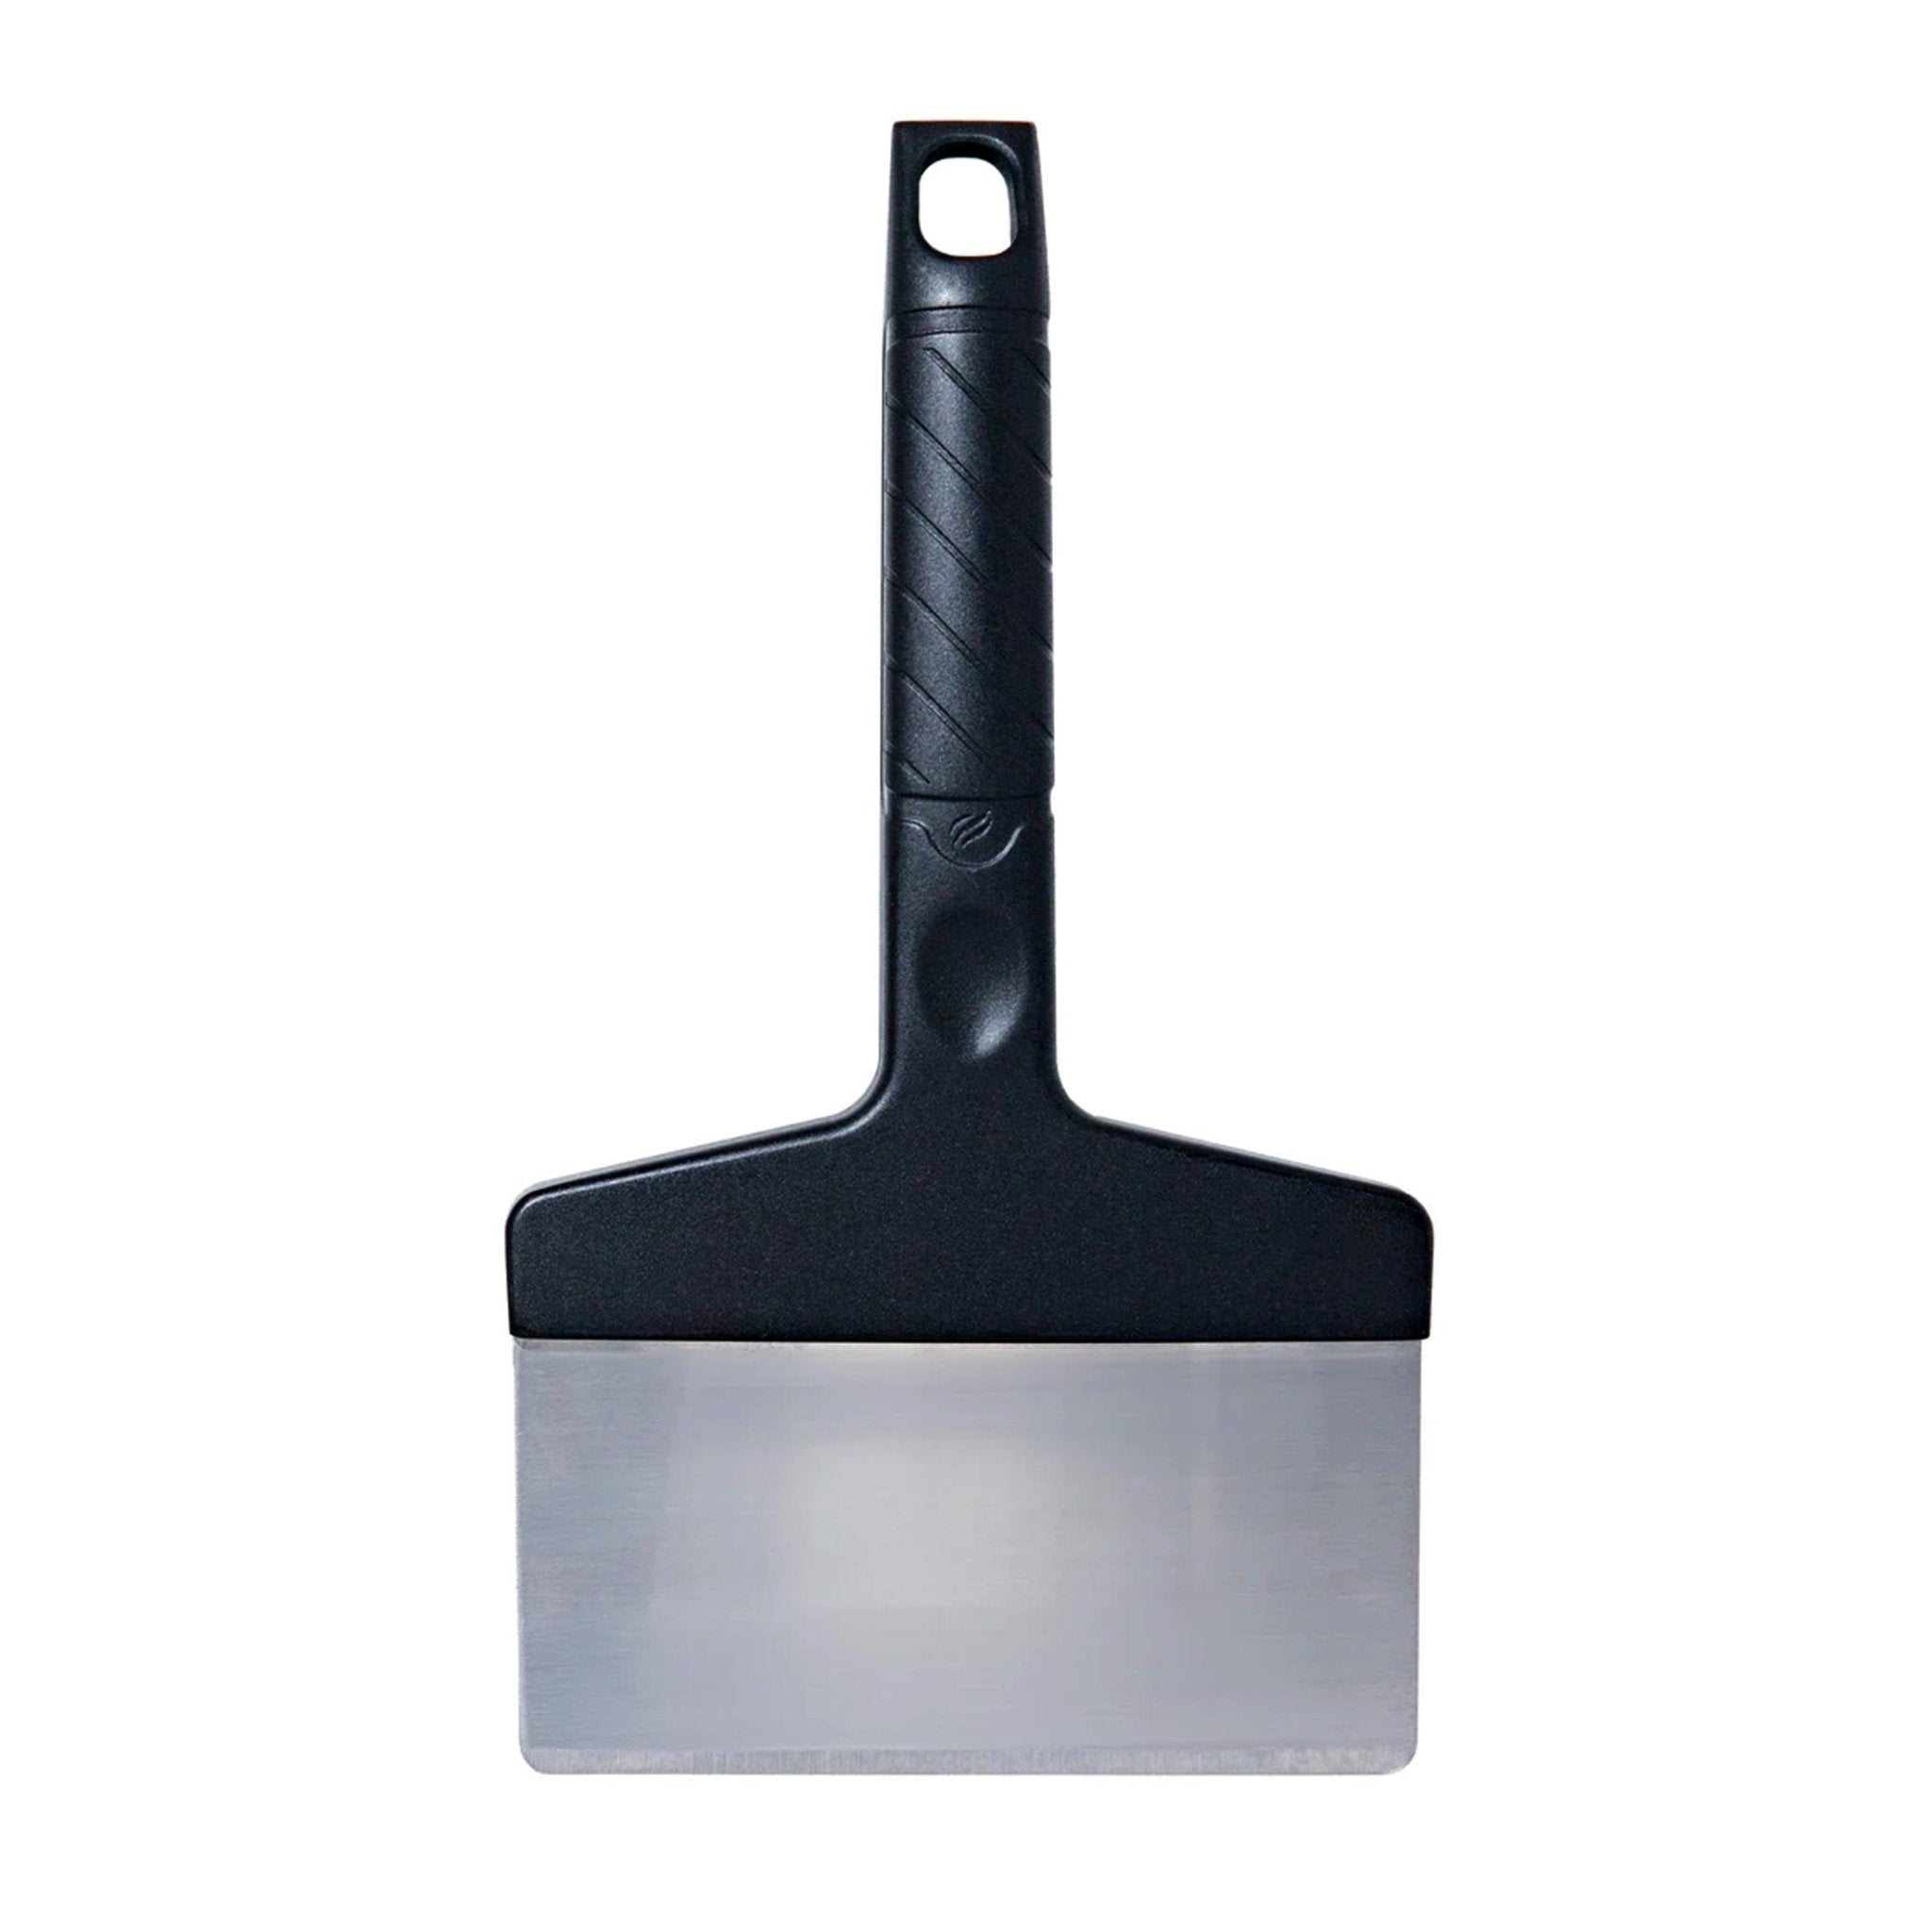 Blackstone Large 6in Stainless Steel Griddle Scraper with Grip